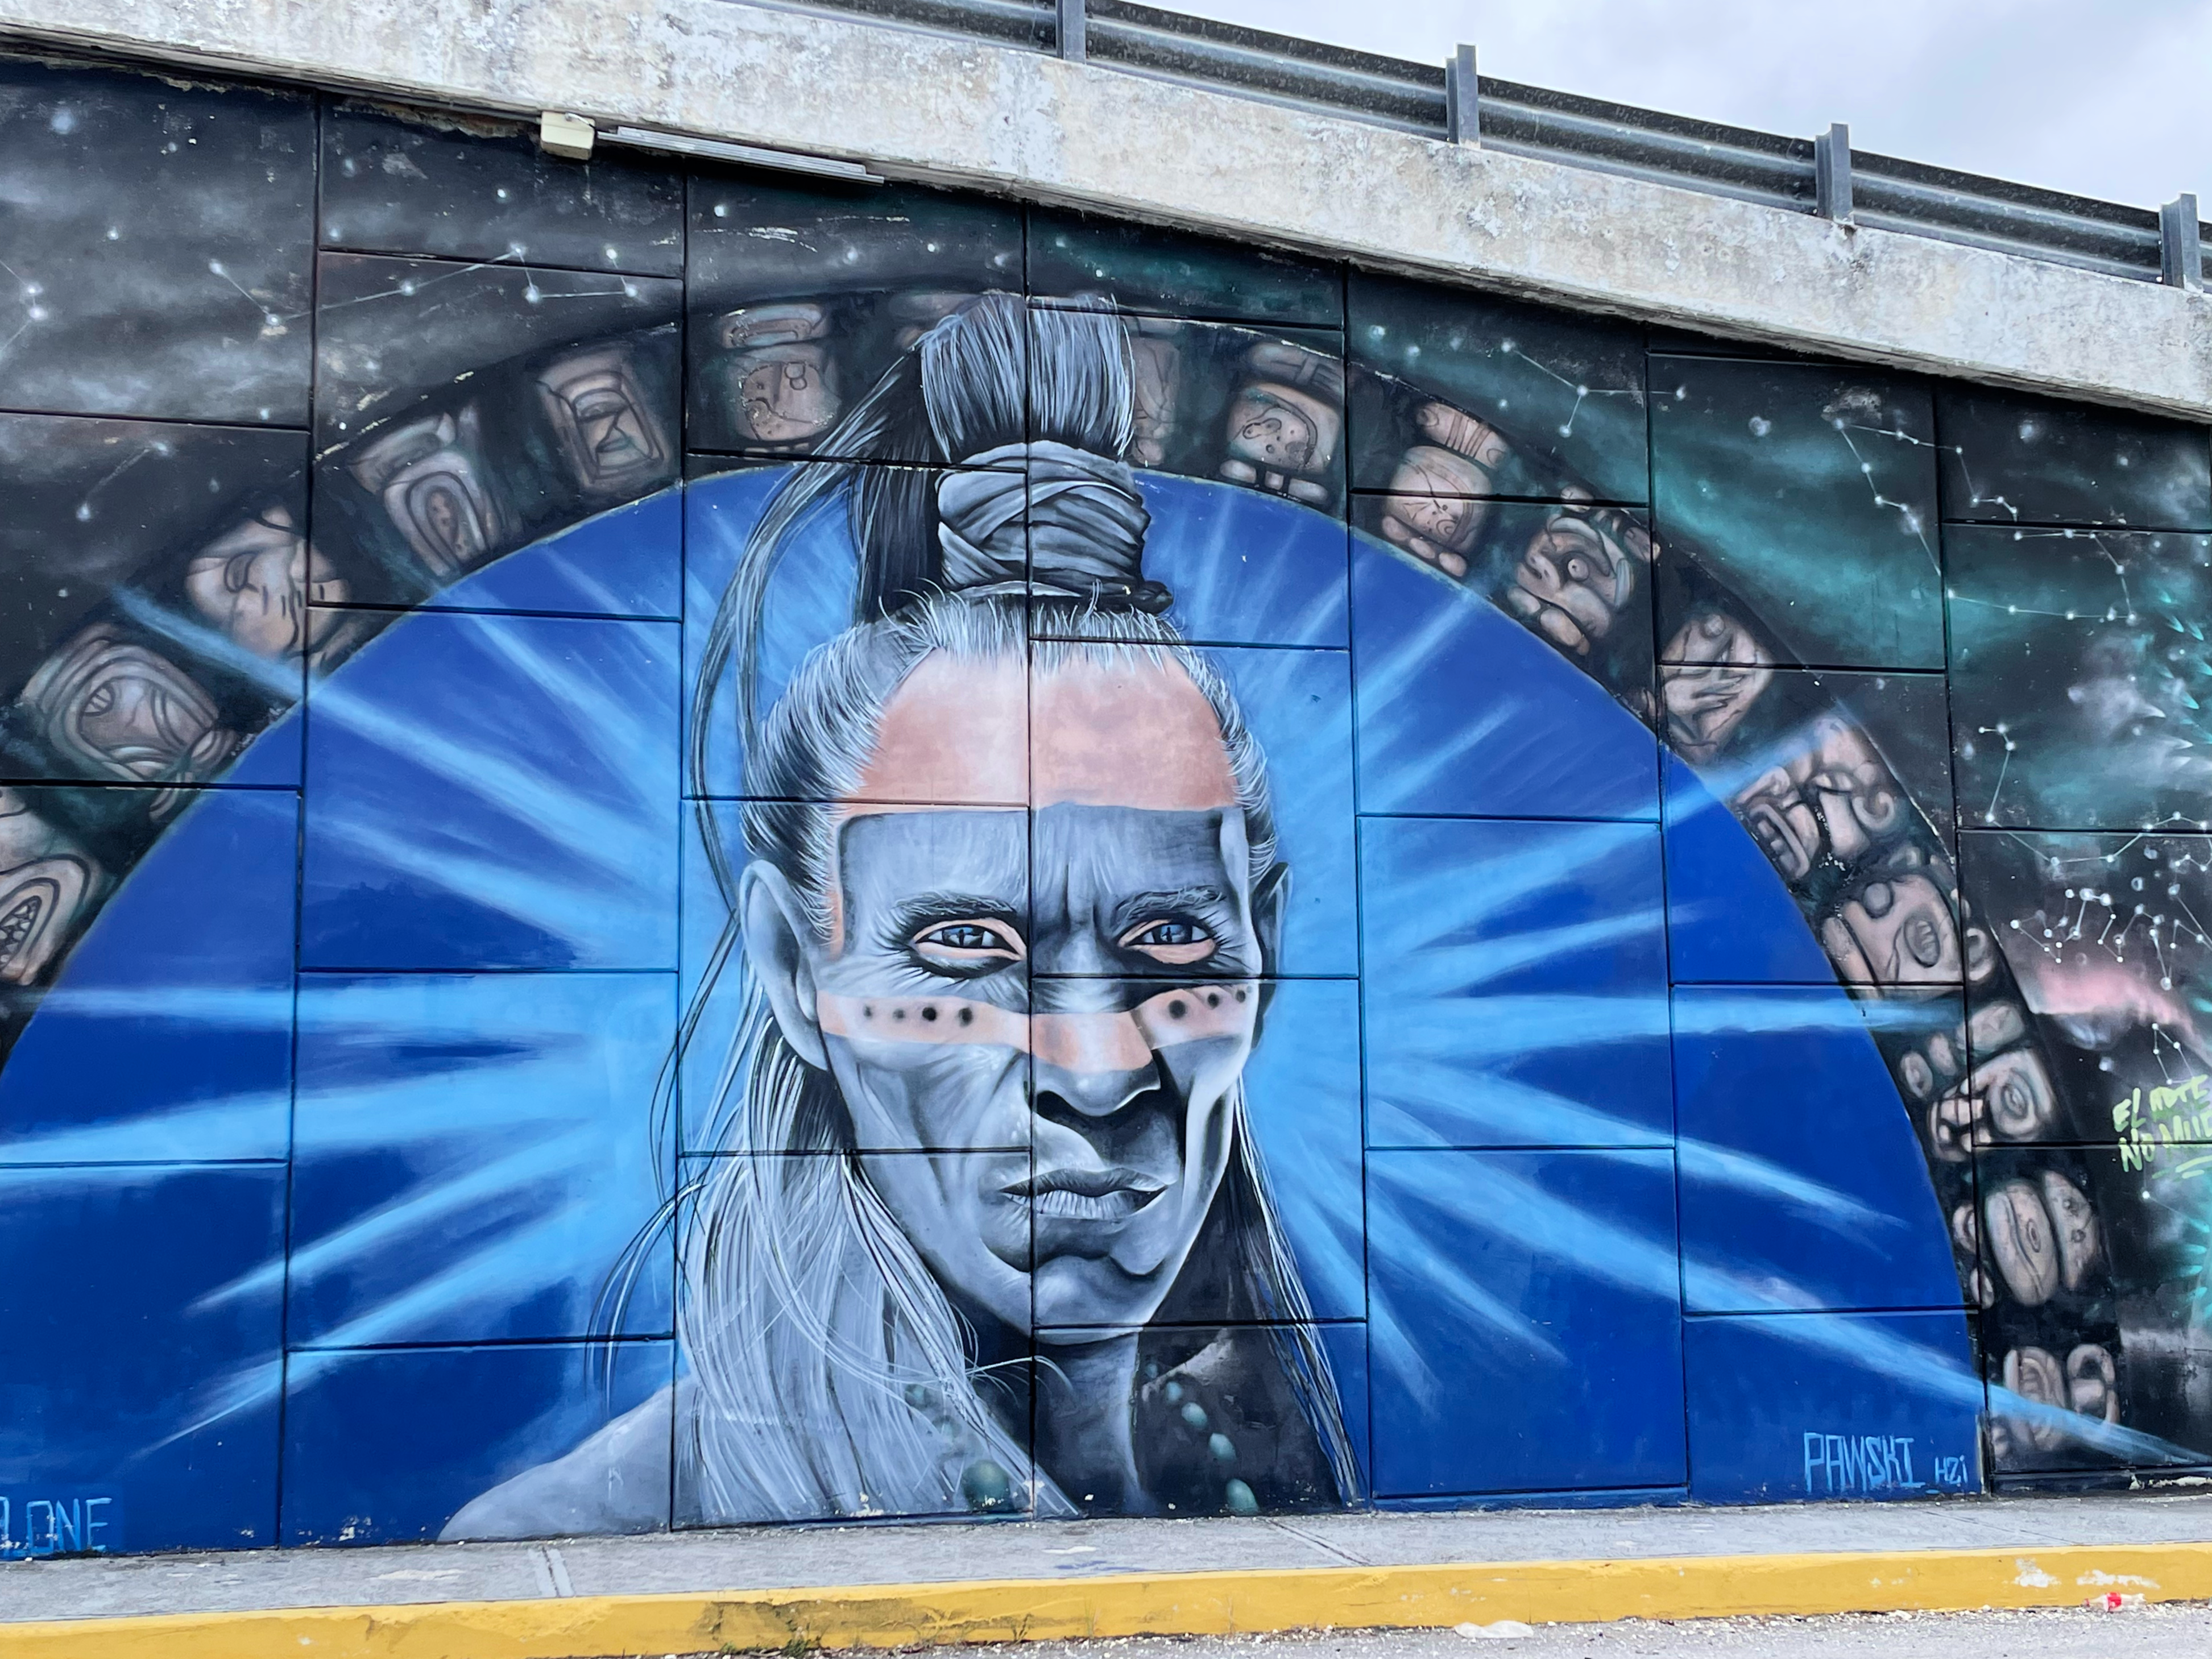 Artwork mural on an underpass in Akumal, Mexico